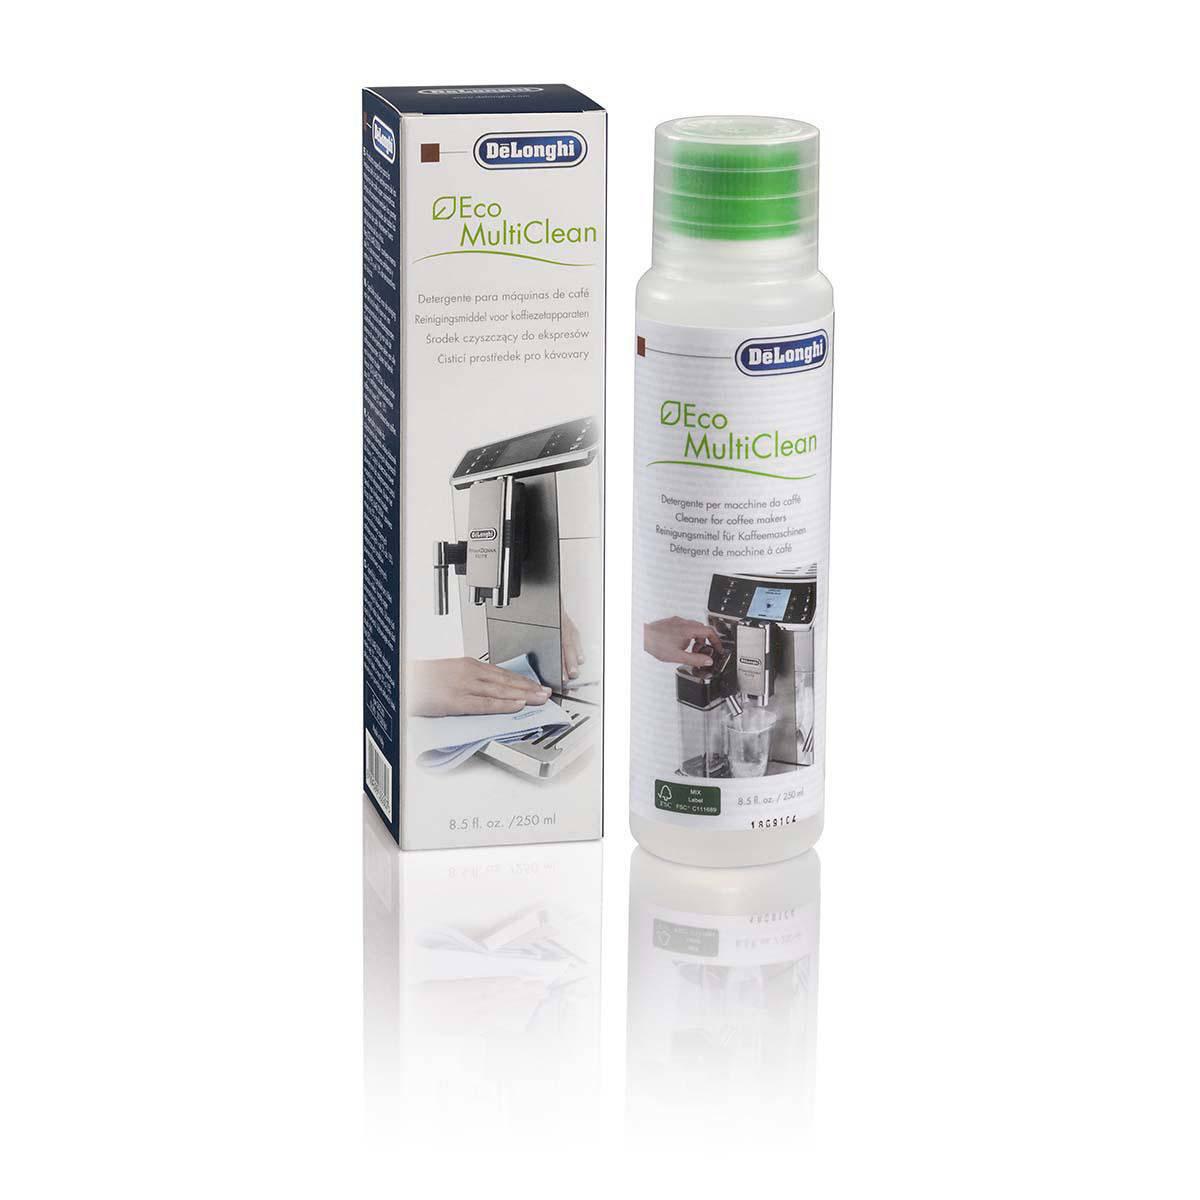 Delonghi DLSC550 Eco MultiClean Milk System Cleaner - Protects/Degreases, 250ml - Healthxpress.ie